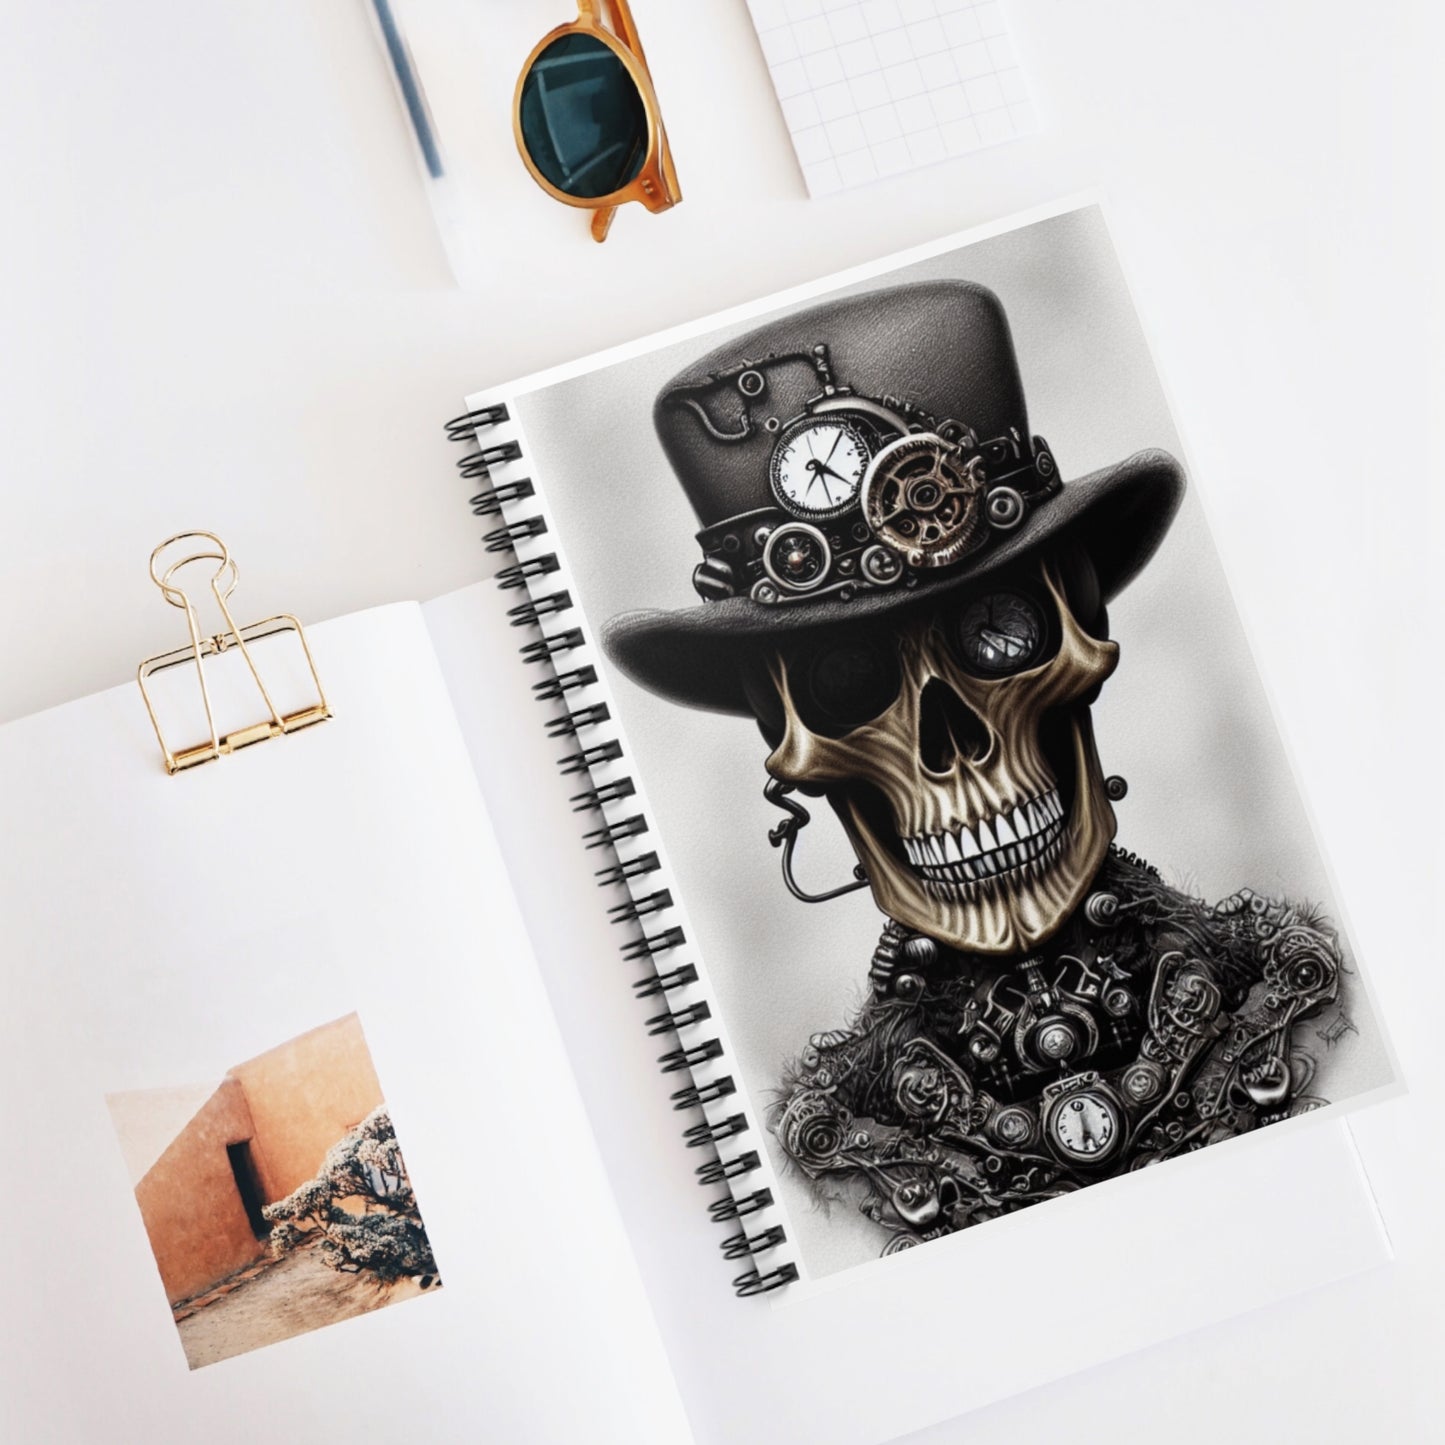 Steampunk Skeleton: Spiral Notebook - Log Books - Journals - Diaries - and More Custom Printed by TheGlassyLass.com